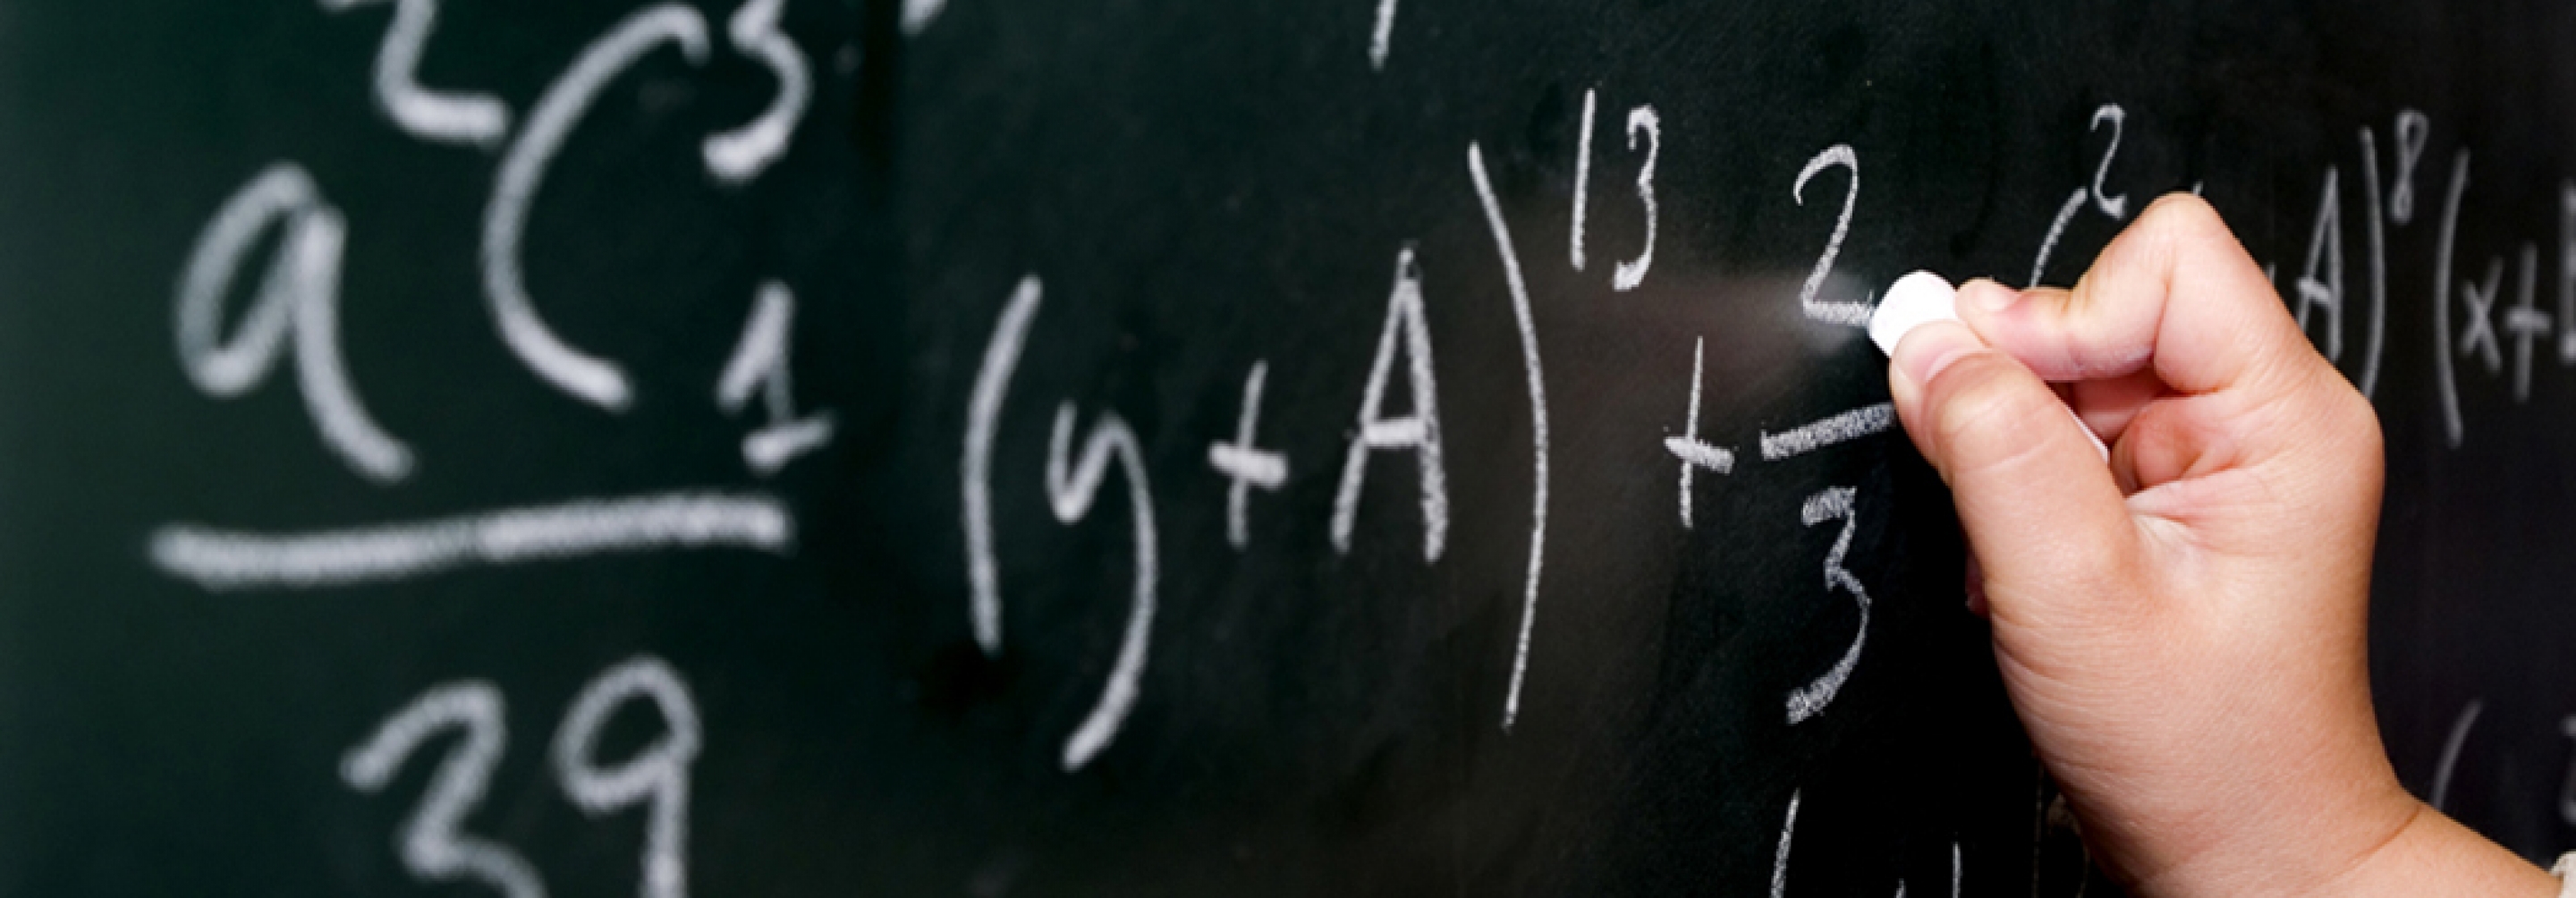 Picture of a hand writing equations on a blackboard